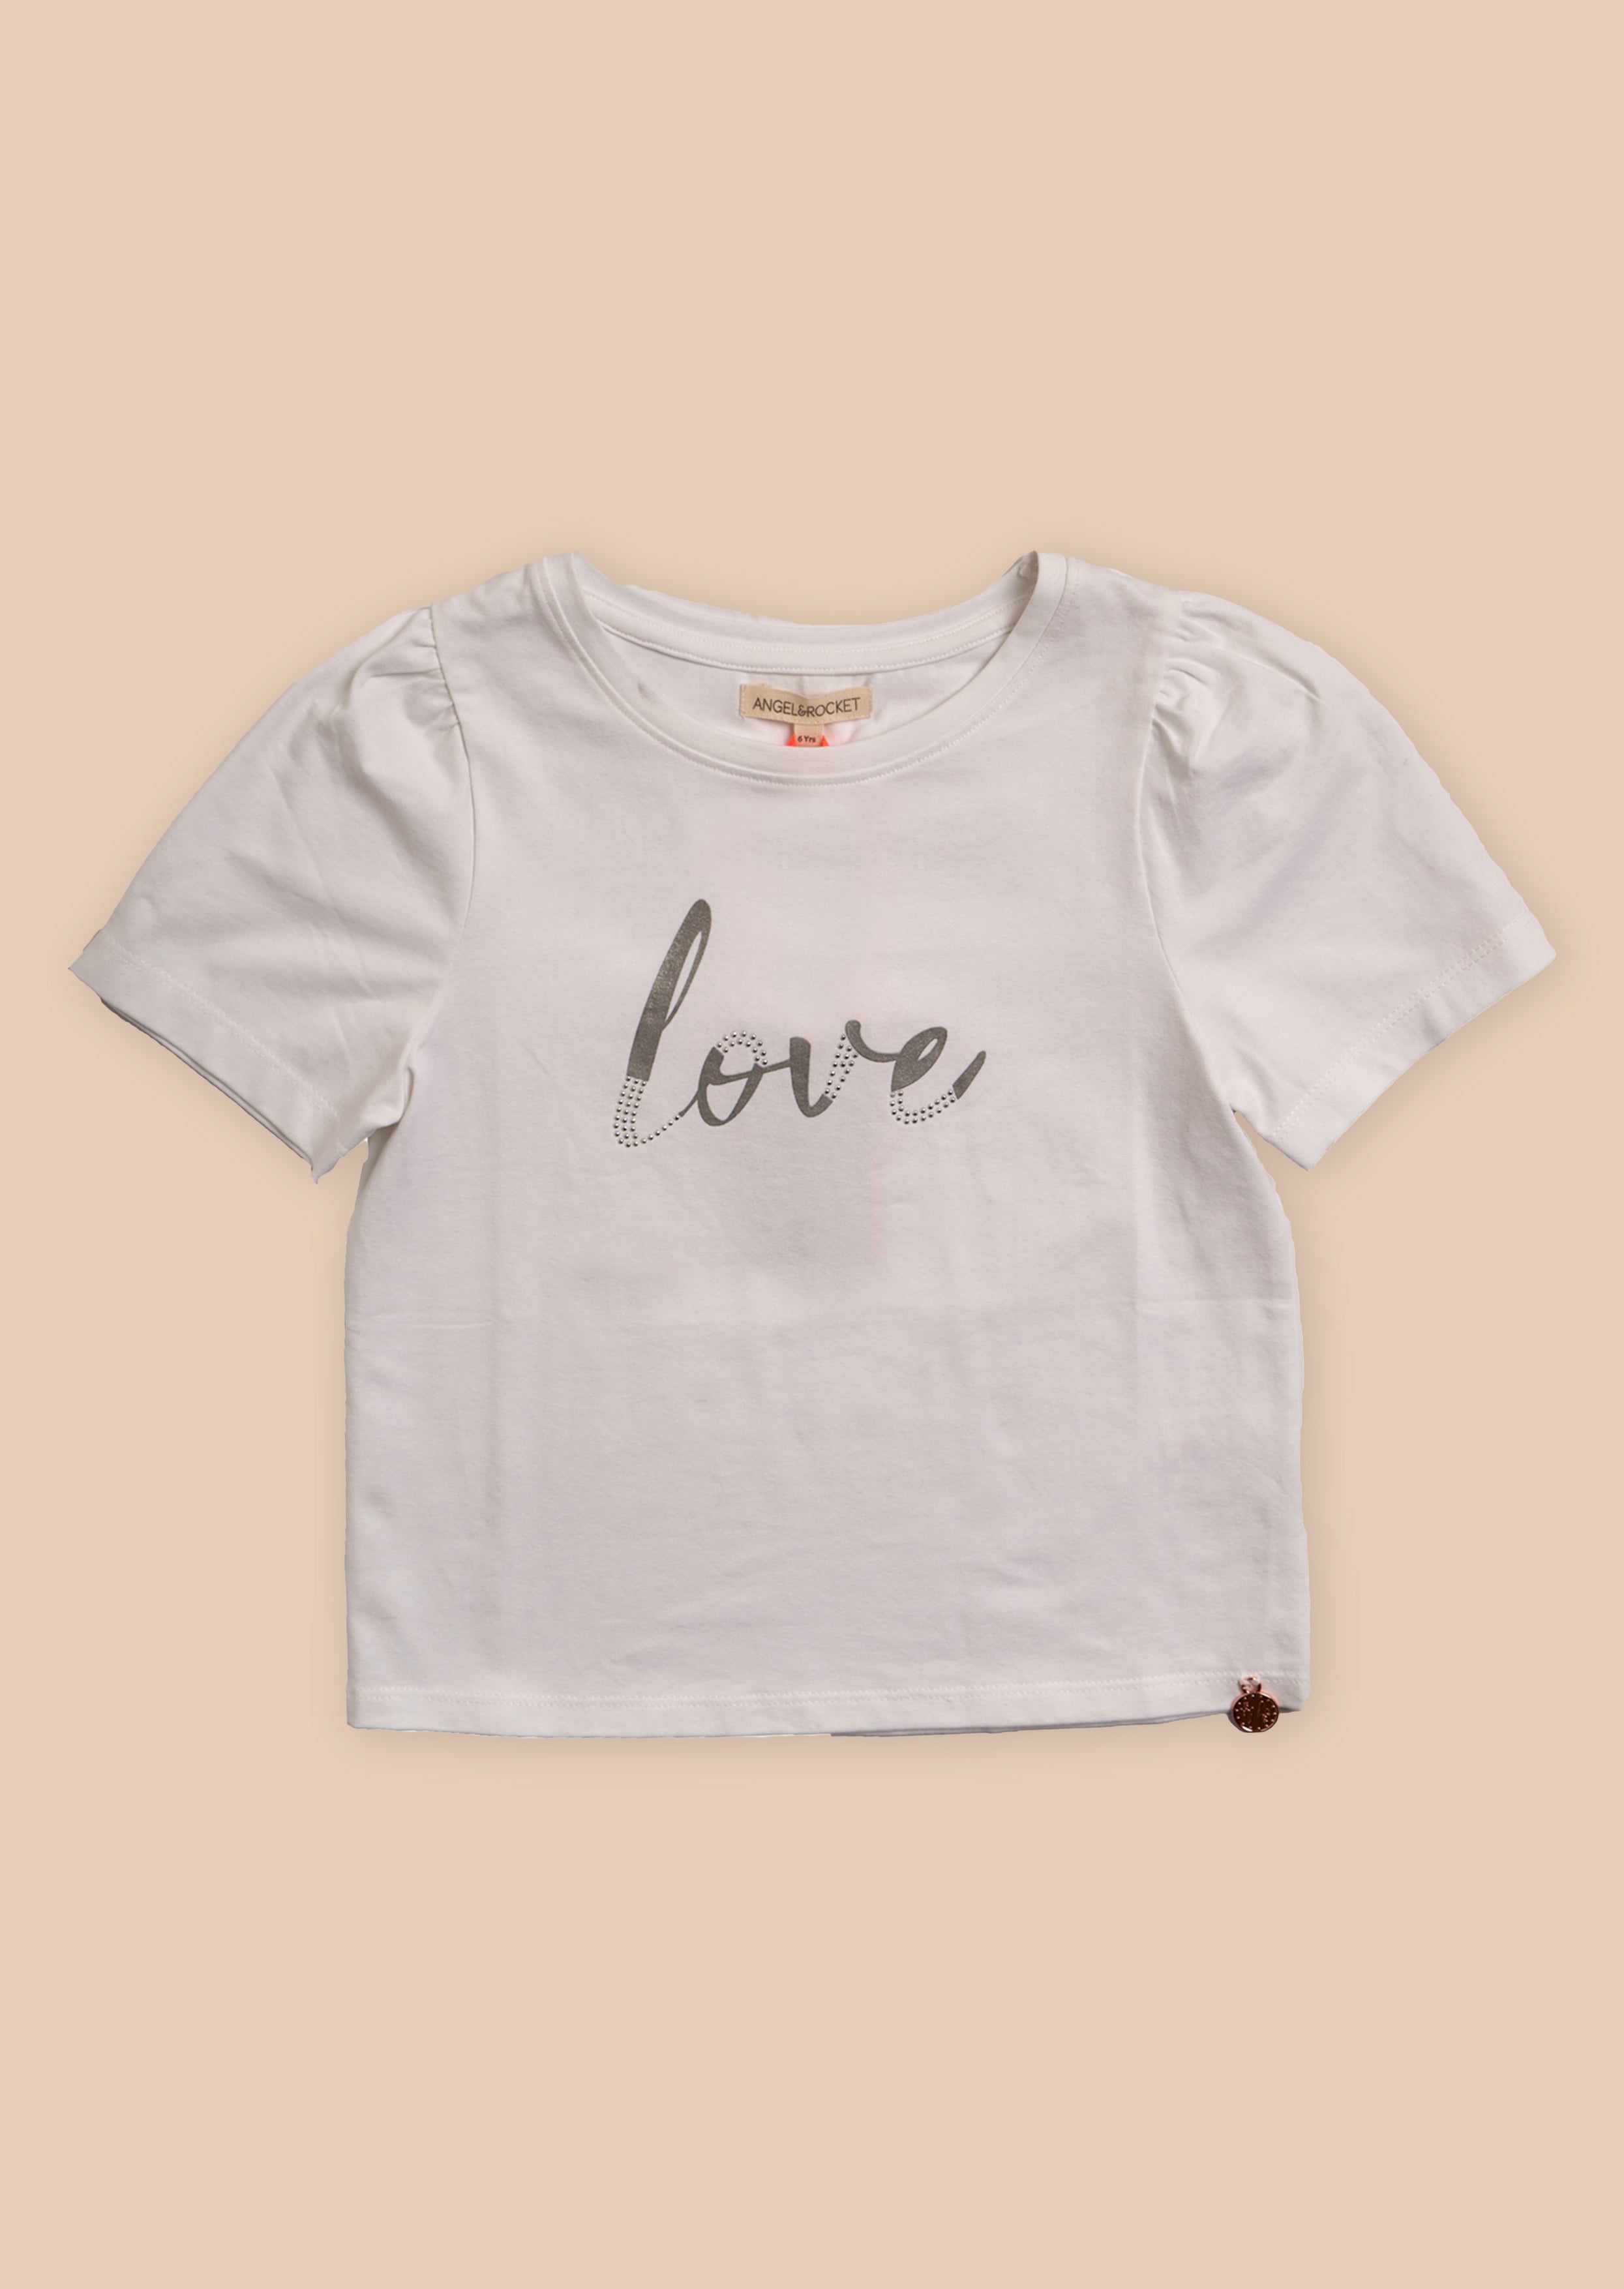 Love Slogan Printed Girls White T-Shirt with Puff Sleeves